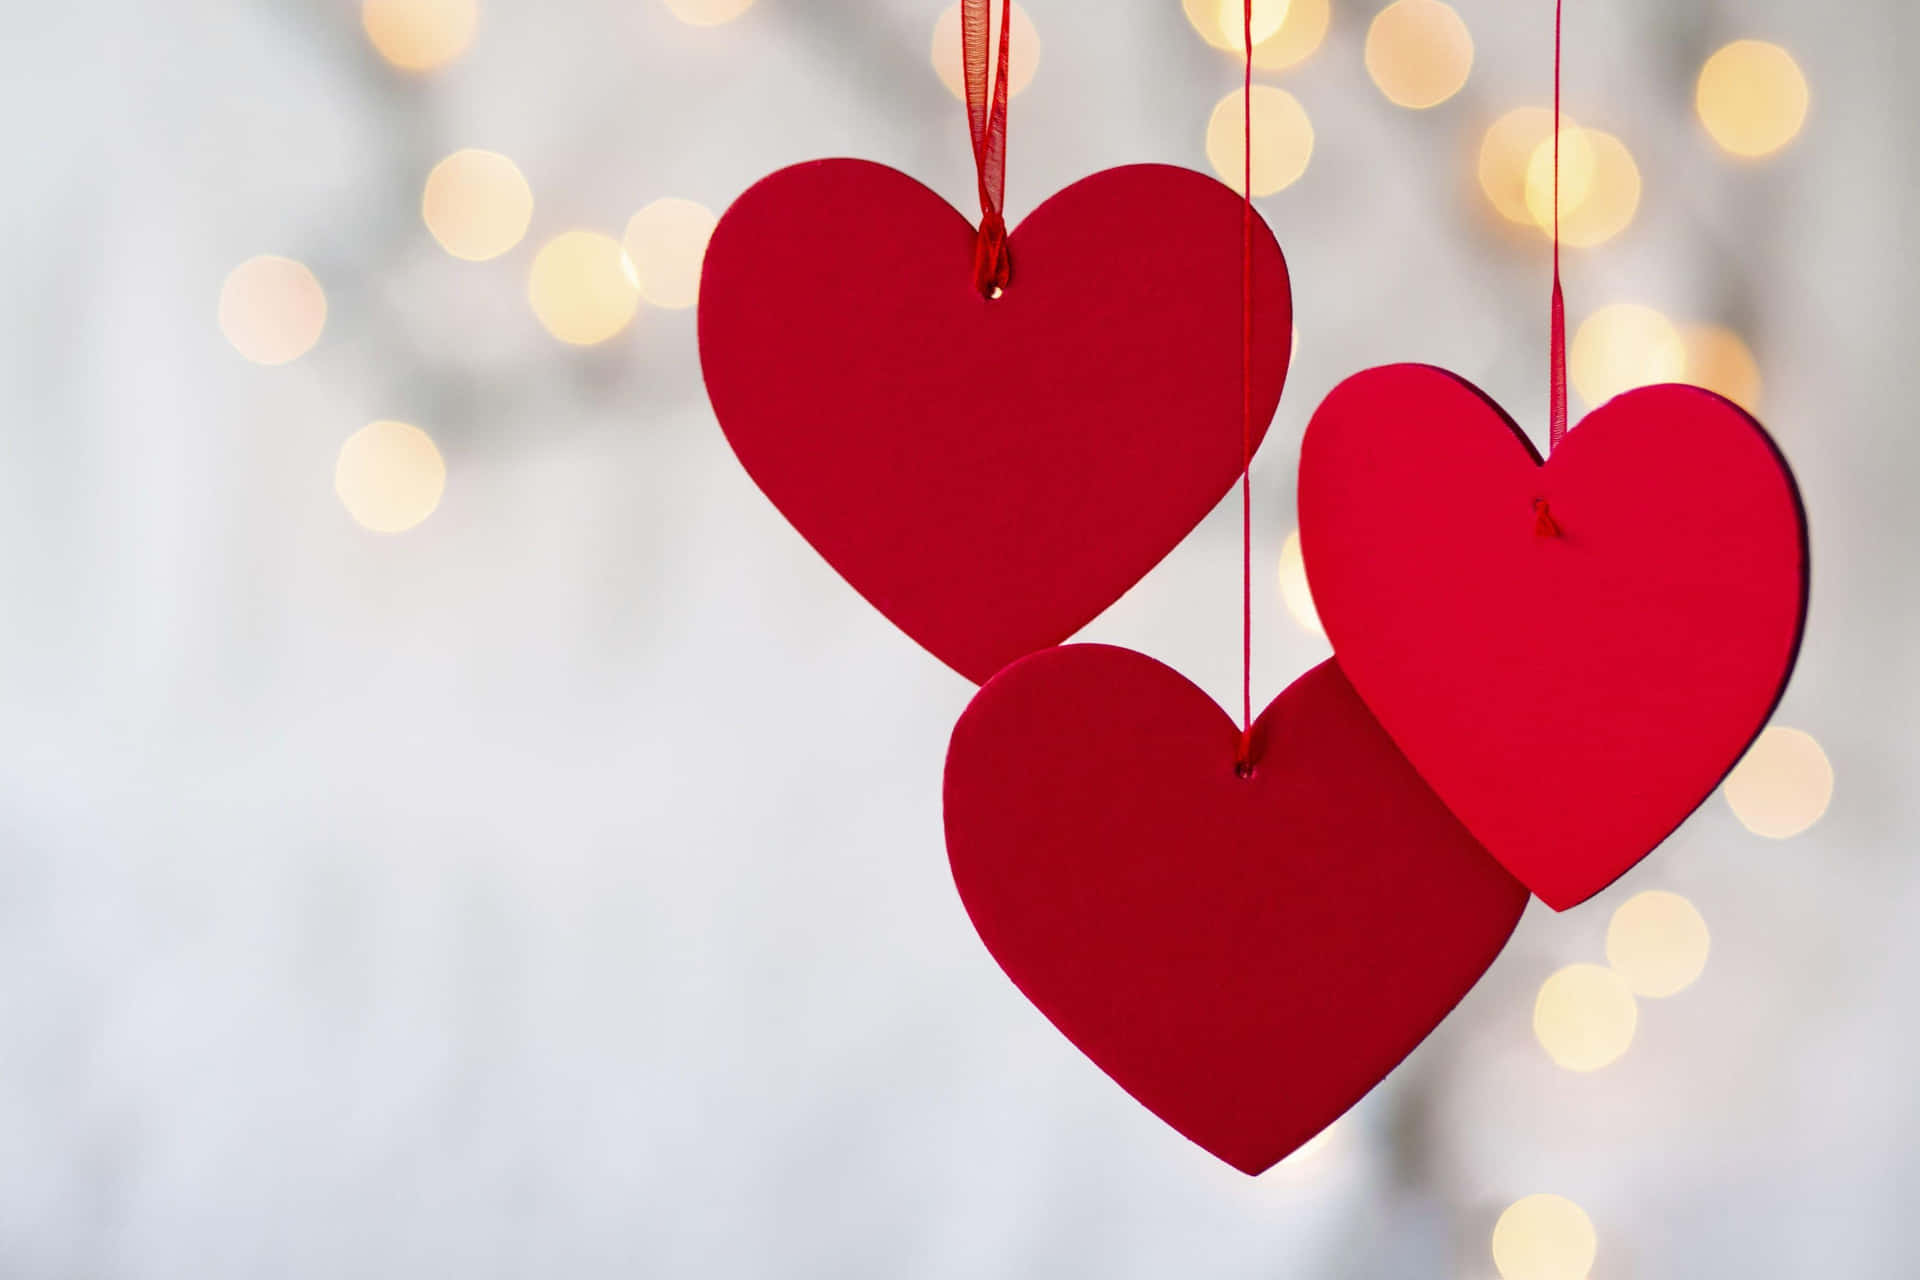 Three Red Hearts Hanging From Strings With Lights Behind Them Wallpaper